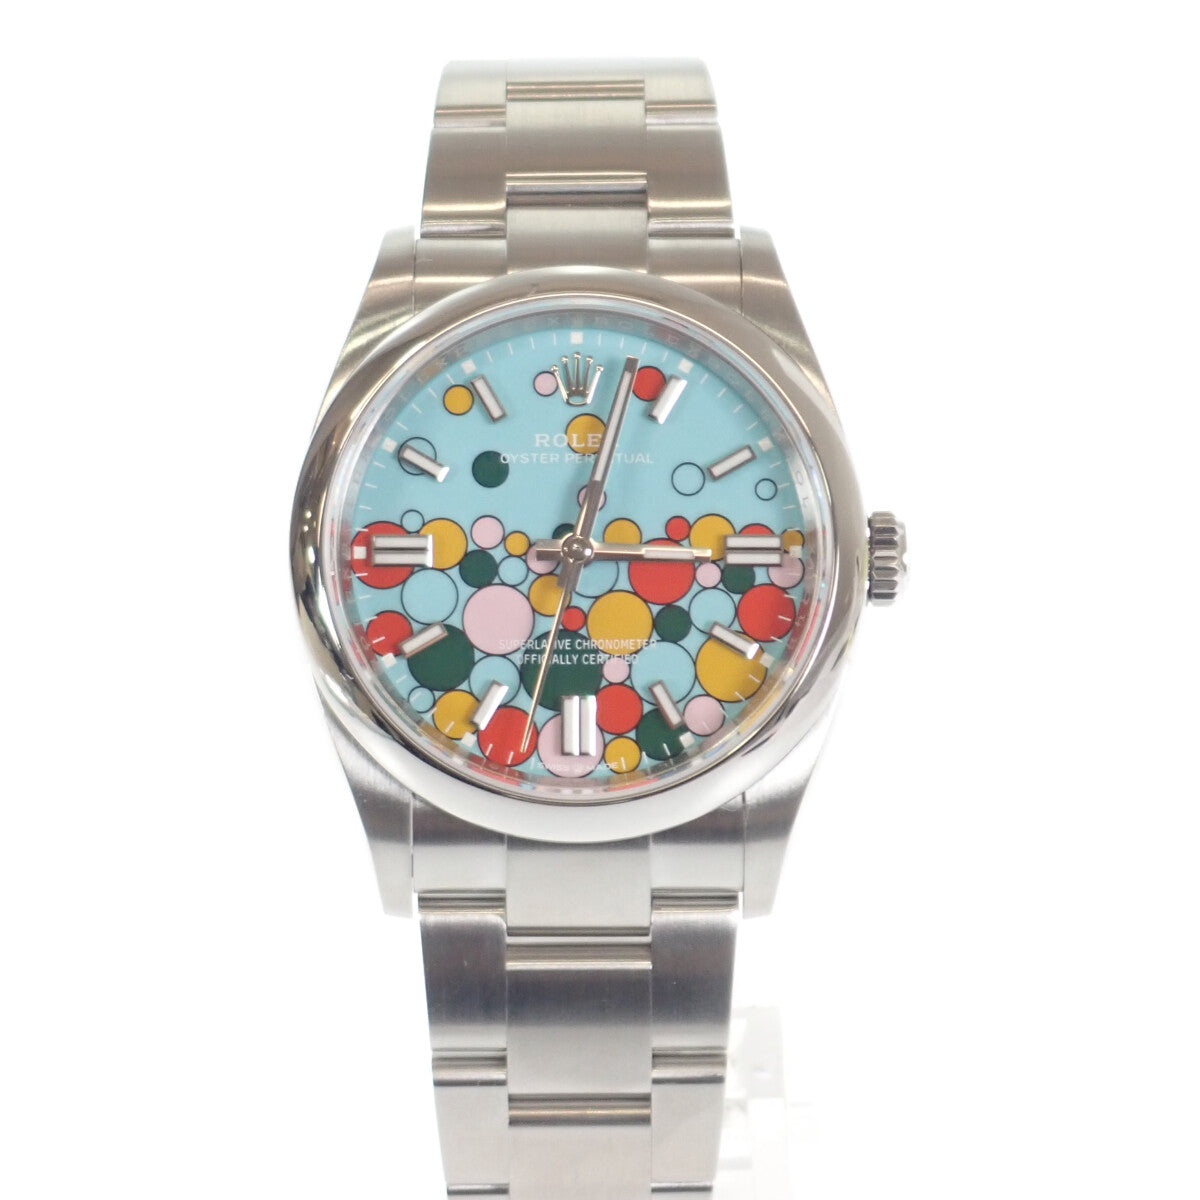 Rolex Oyster Perpetual 36 Celebration Motif Men's Wristwatch 126000, Stainless Steel, Blue Dial - Used Condition 126000.0